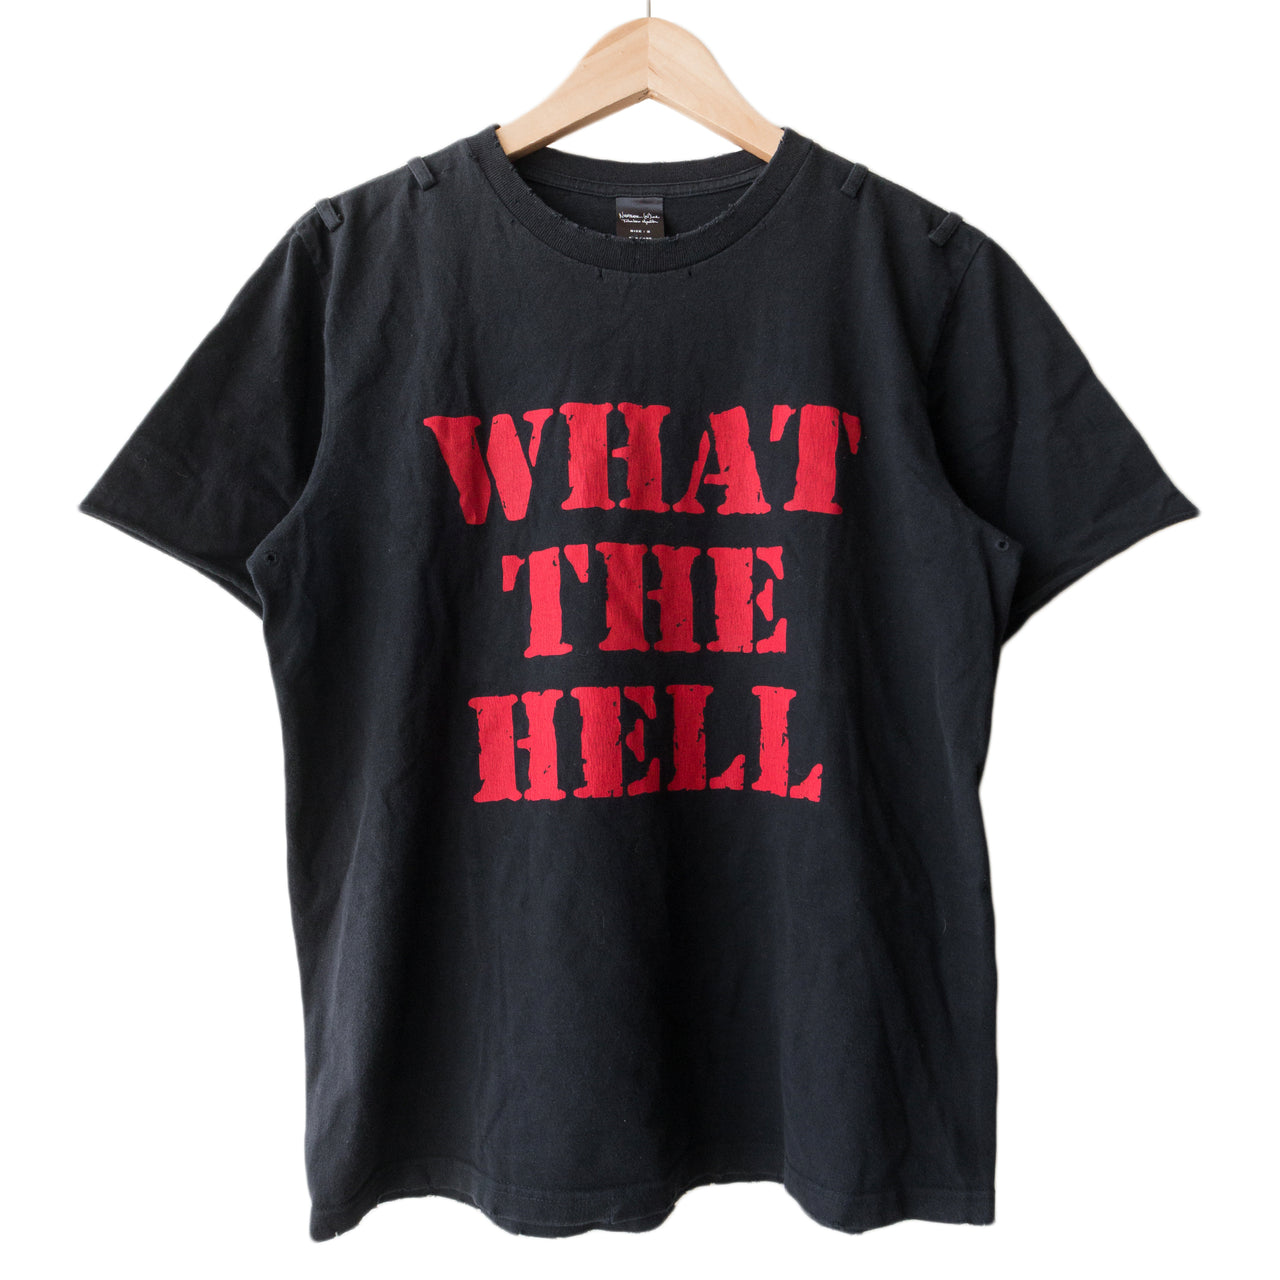 Number (N)ine "What The Hell" Tee - SS06 "Welcome to the Shadow"